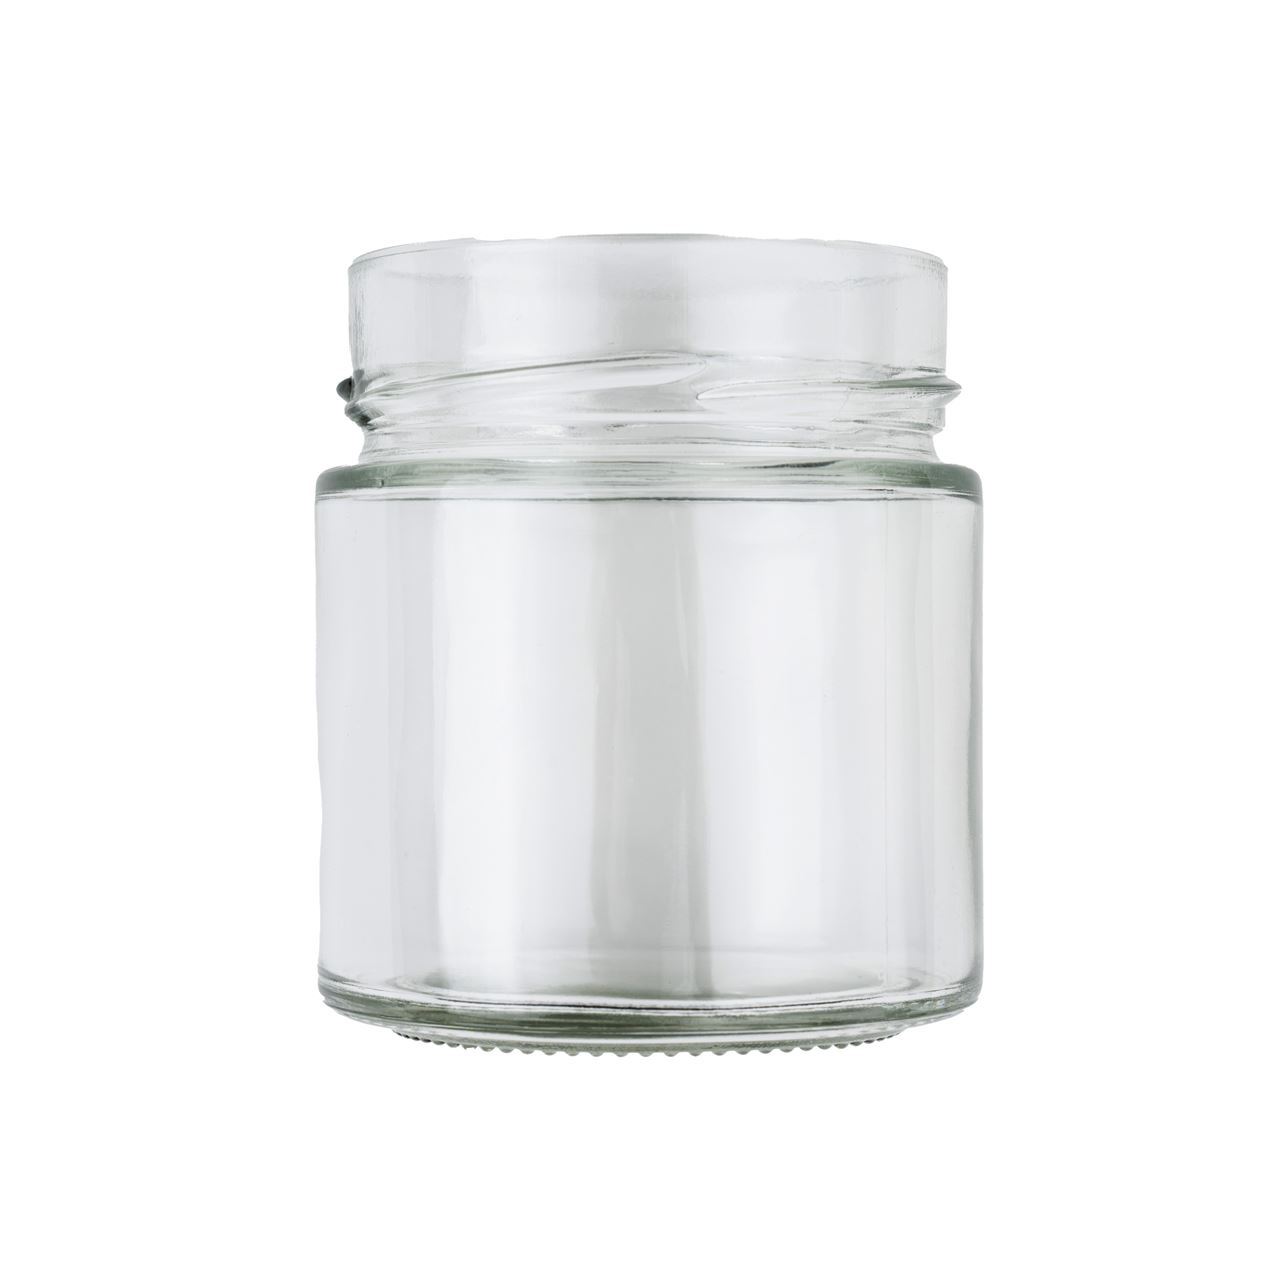 https://tricorbraun.ca/content/images/thumbs/0015357_257-ml-clear-glass-jar-70-mm-lug-neck-finish-round-base.jpeg